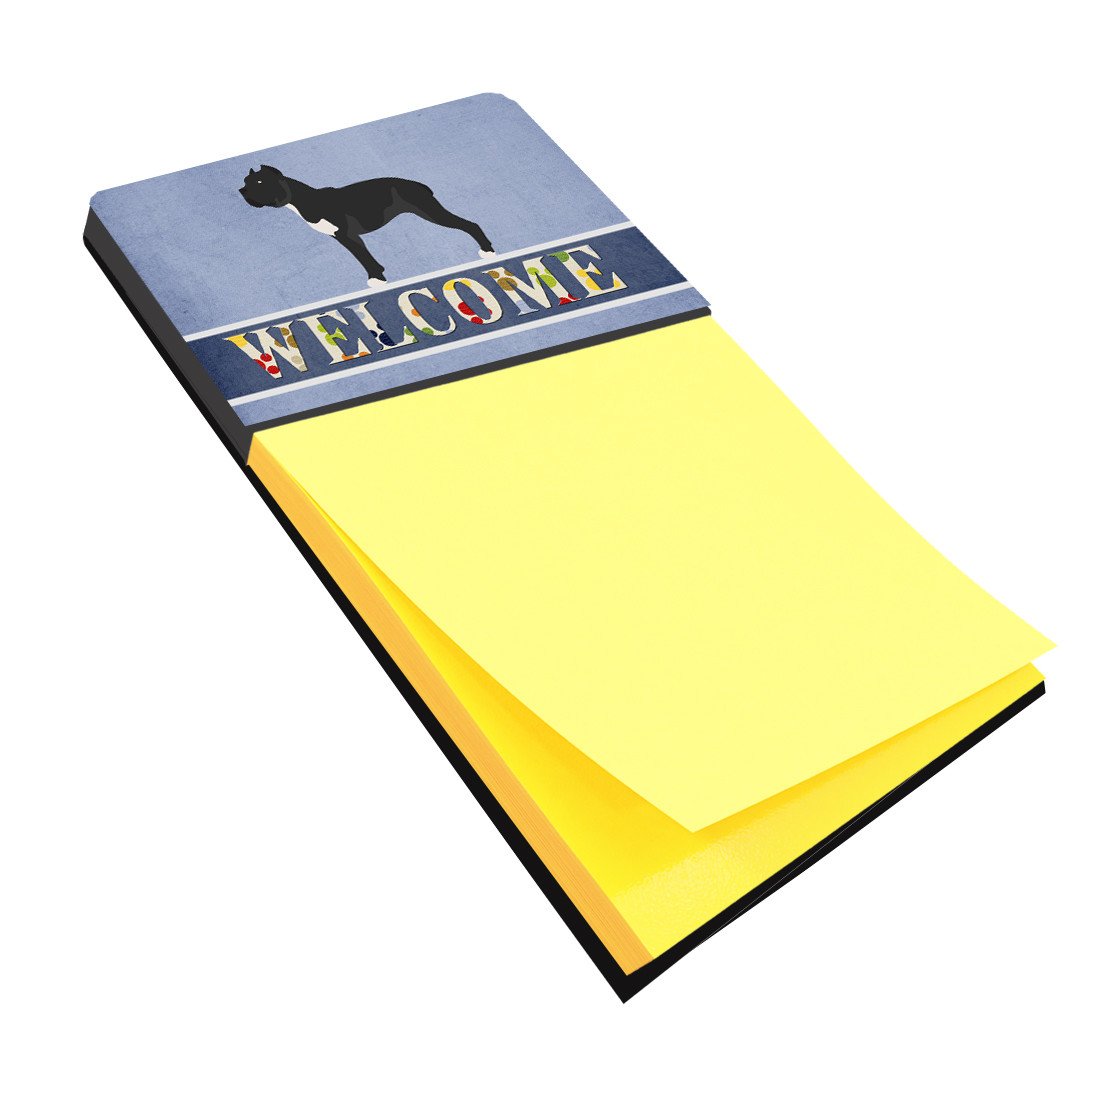 Cane Corso Welcome Sticky Note Holder BB8345SN by Caroline's Treasures